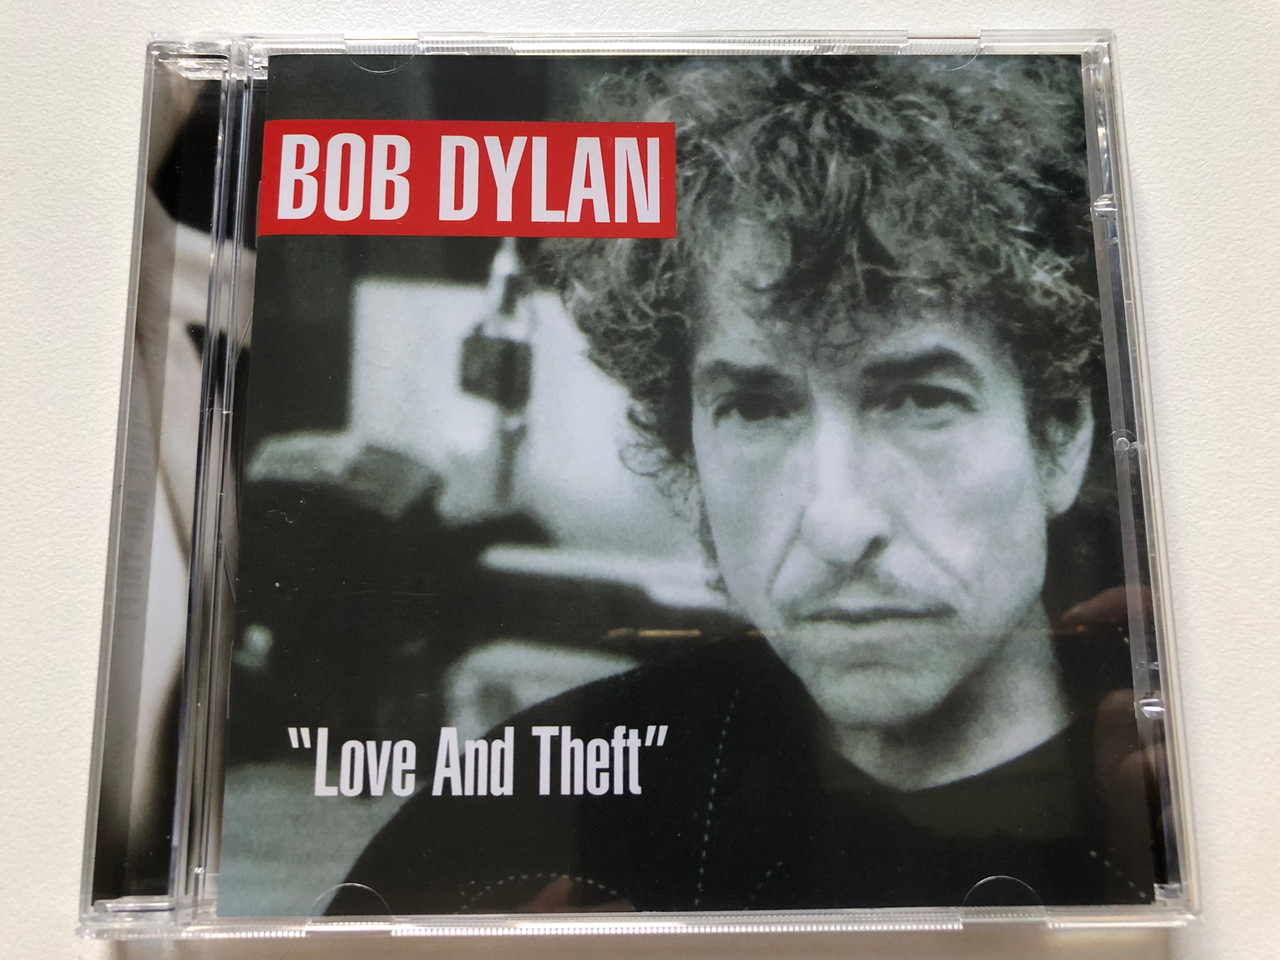 https://cdn10.bigcommerce.com/s-62bdpkt7pb/products/0/images/312318/Bob_Dylan_Love_And_Theft_Columbia_Audio_CD_2001_512357_2_1__96149.1699973783.1280.1280.JPG?c=2